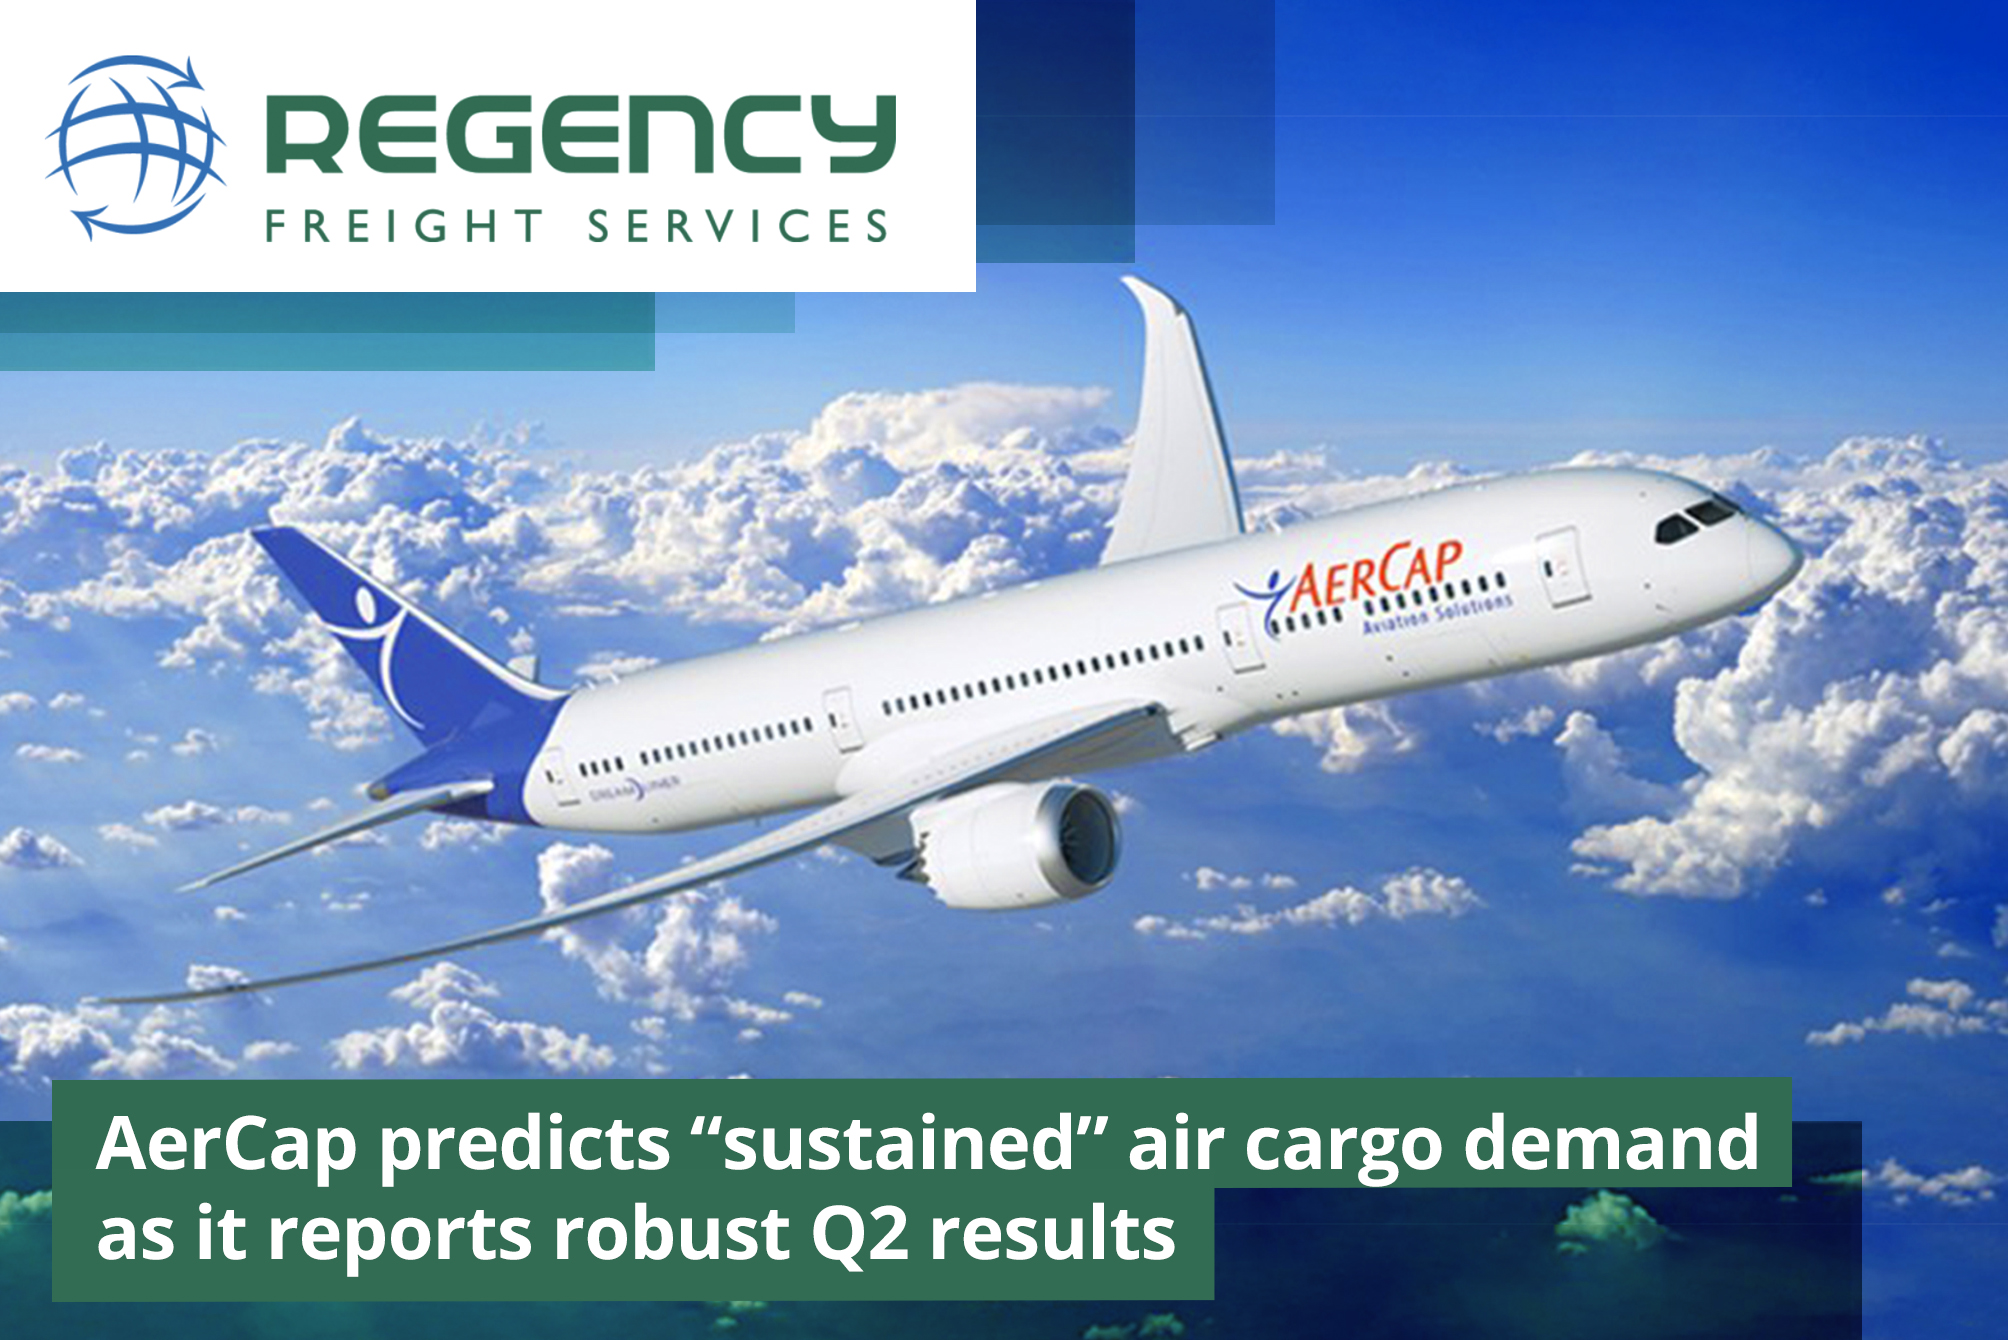 AerCap predicted “sustained” air cargo demand as it reports robust Q2 results